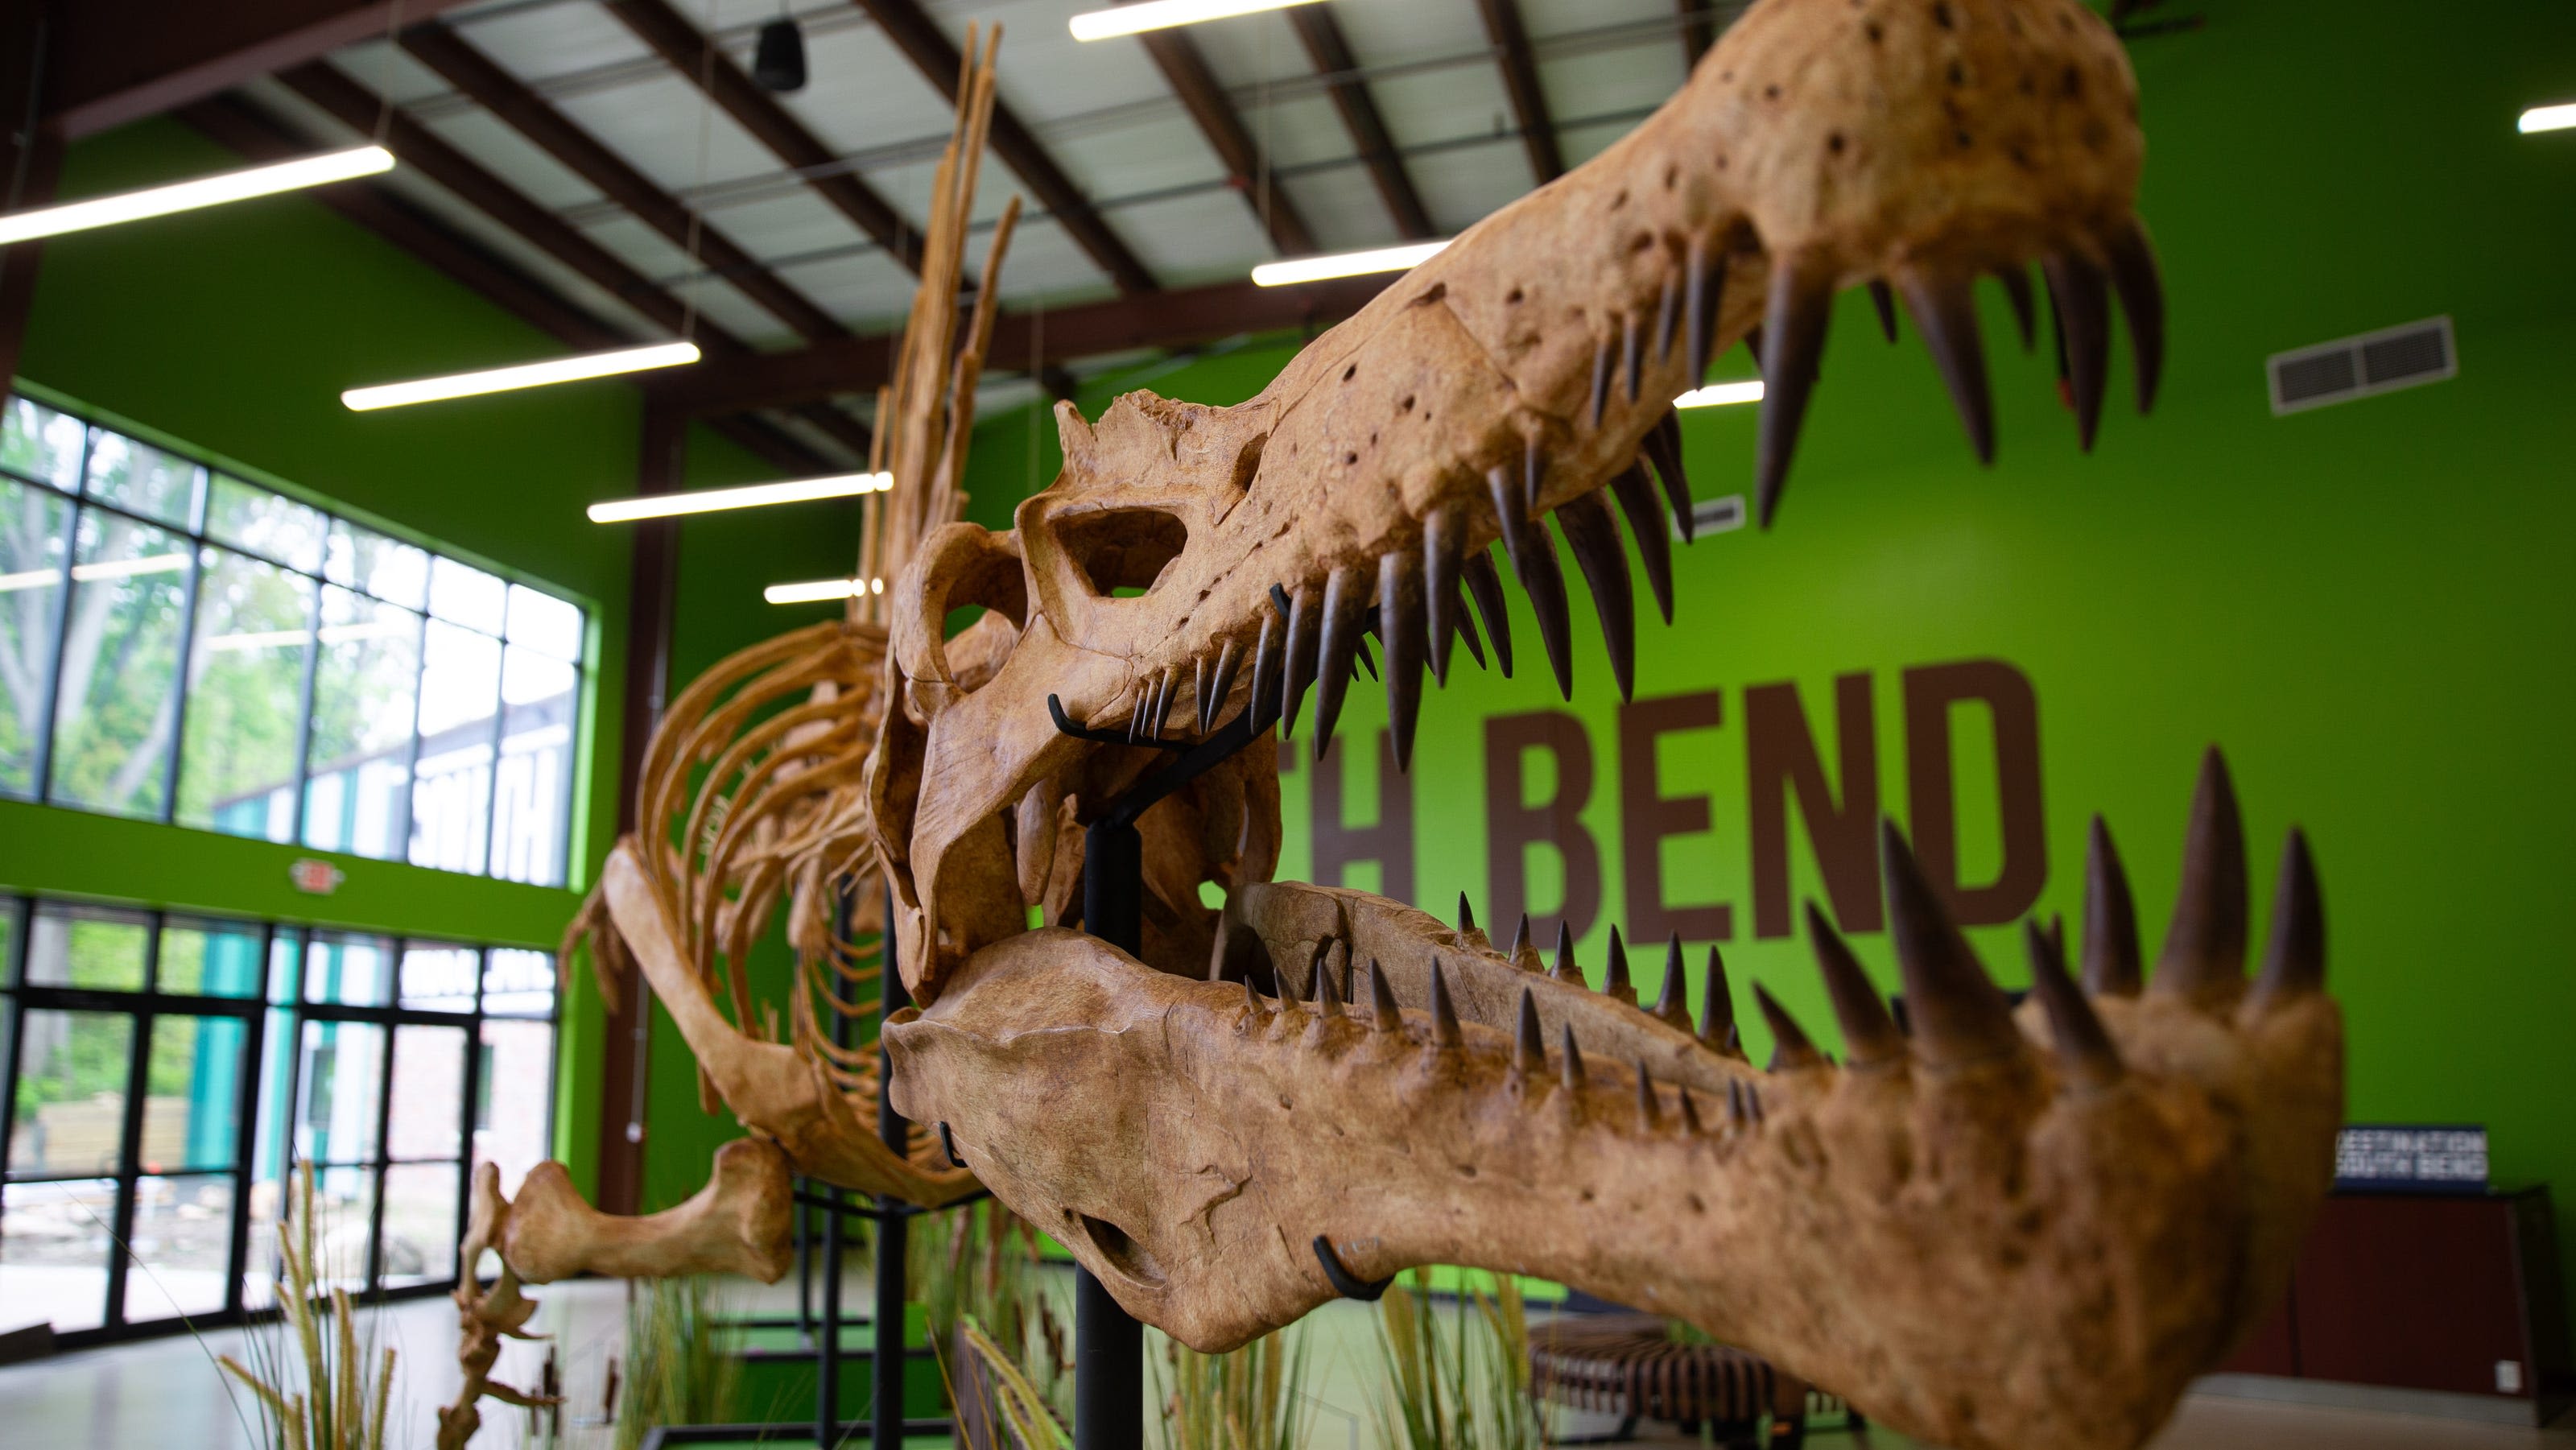 South Bend's Indiana Dinosaur Museum set to open July 12. Here's what you need to know.